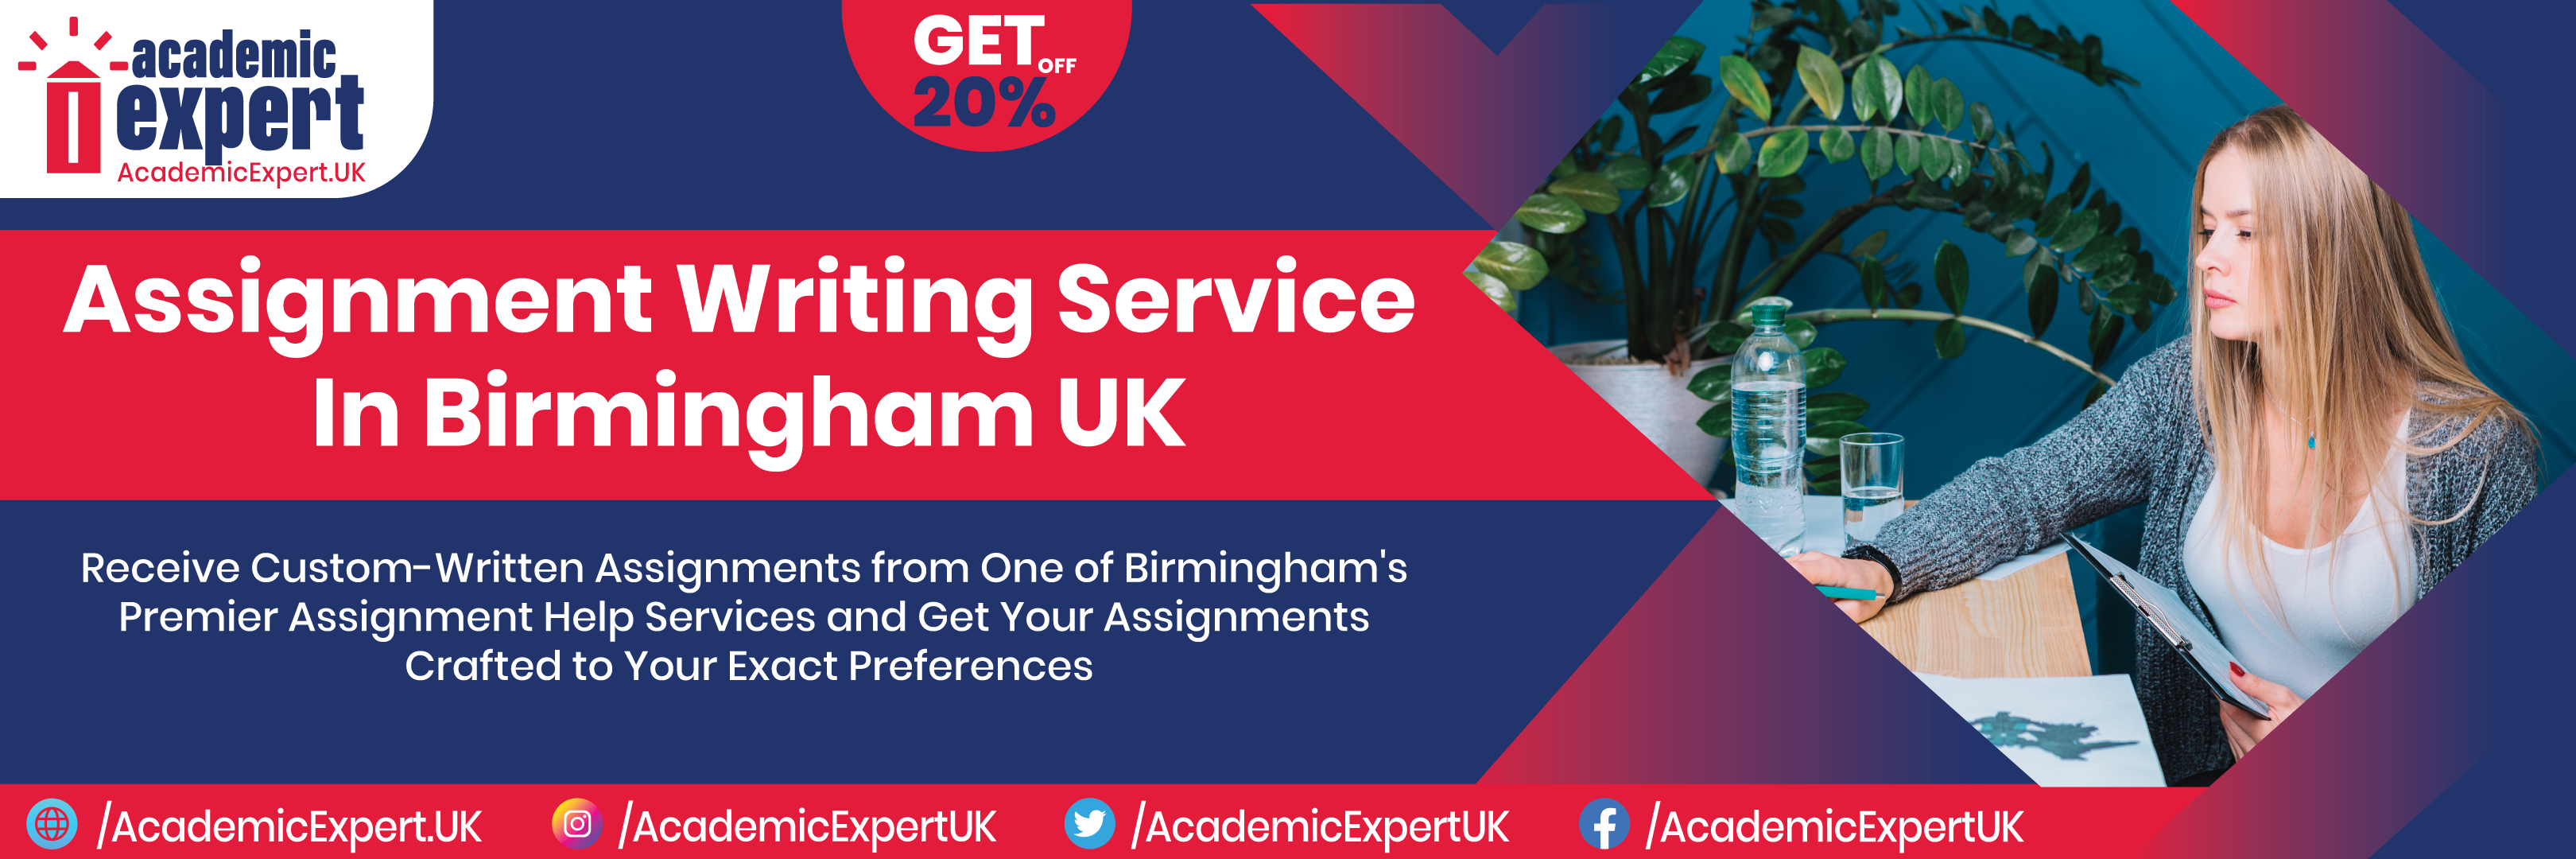 Looking For The Best  Assignment Writing Service In Birmingham? Choose Academic Expert, Your Birmingham-Based Assistance Provider